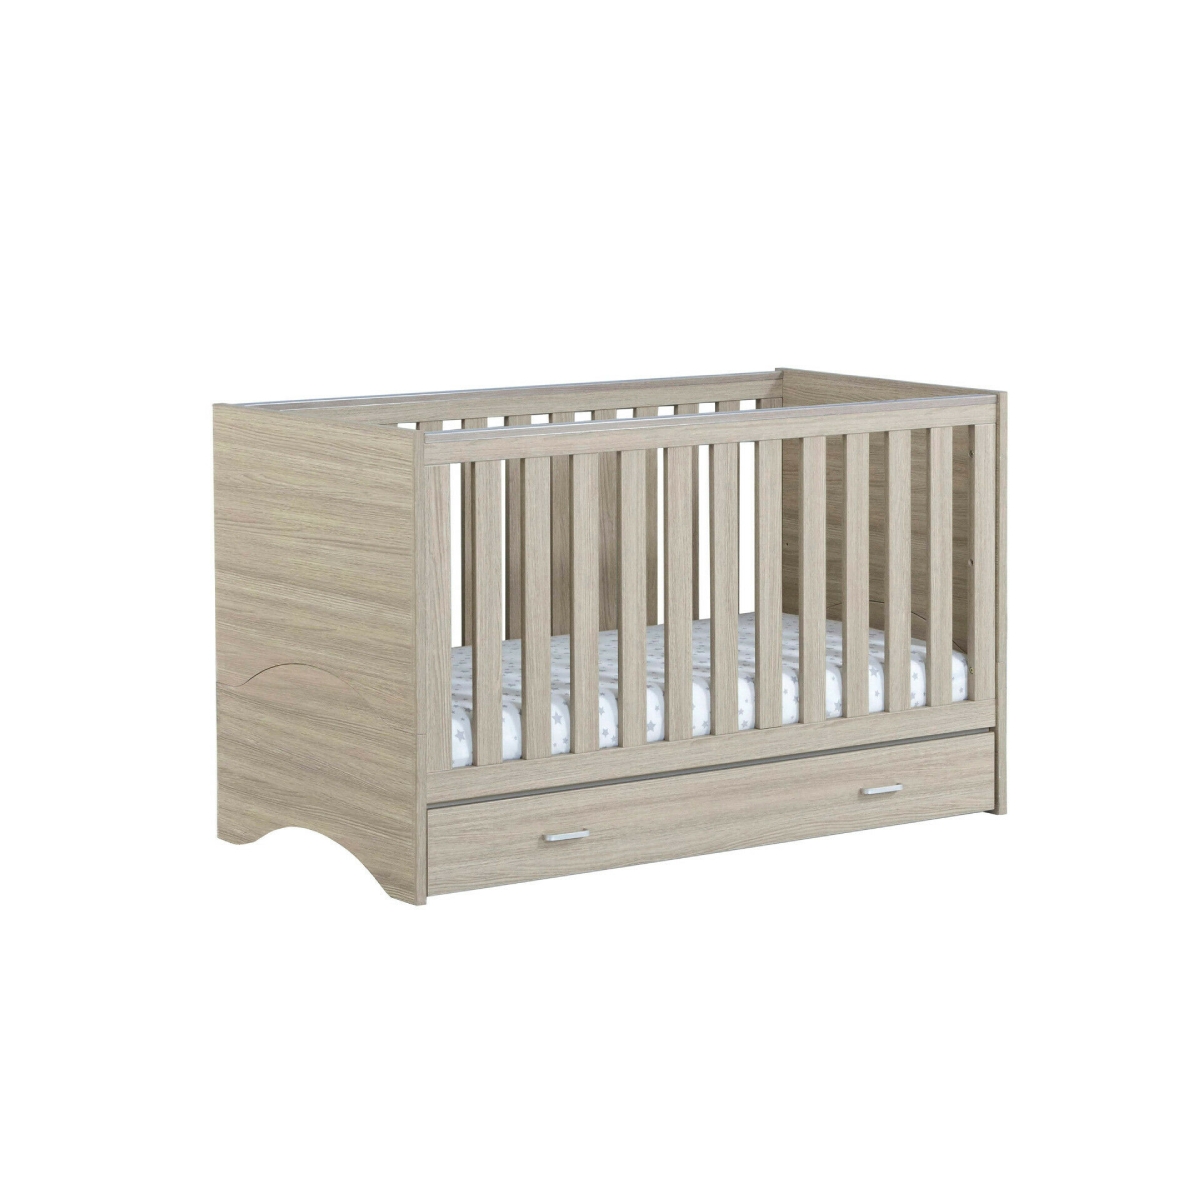 Babymore Veni Cot Bed with Drawer